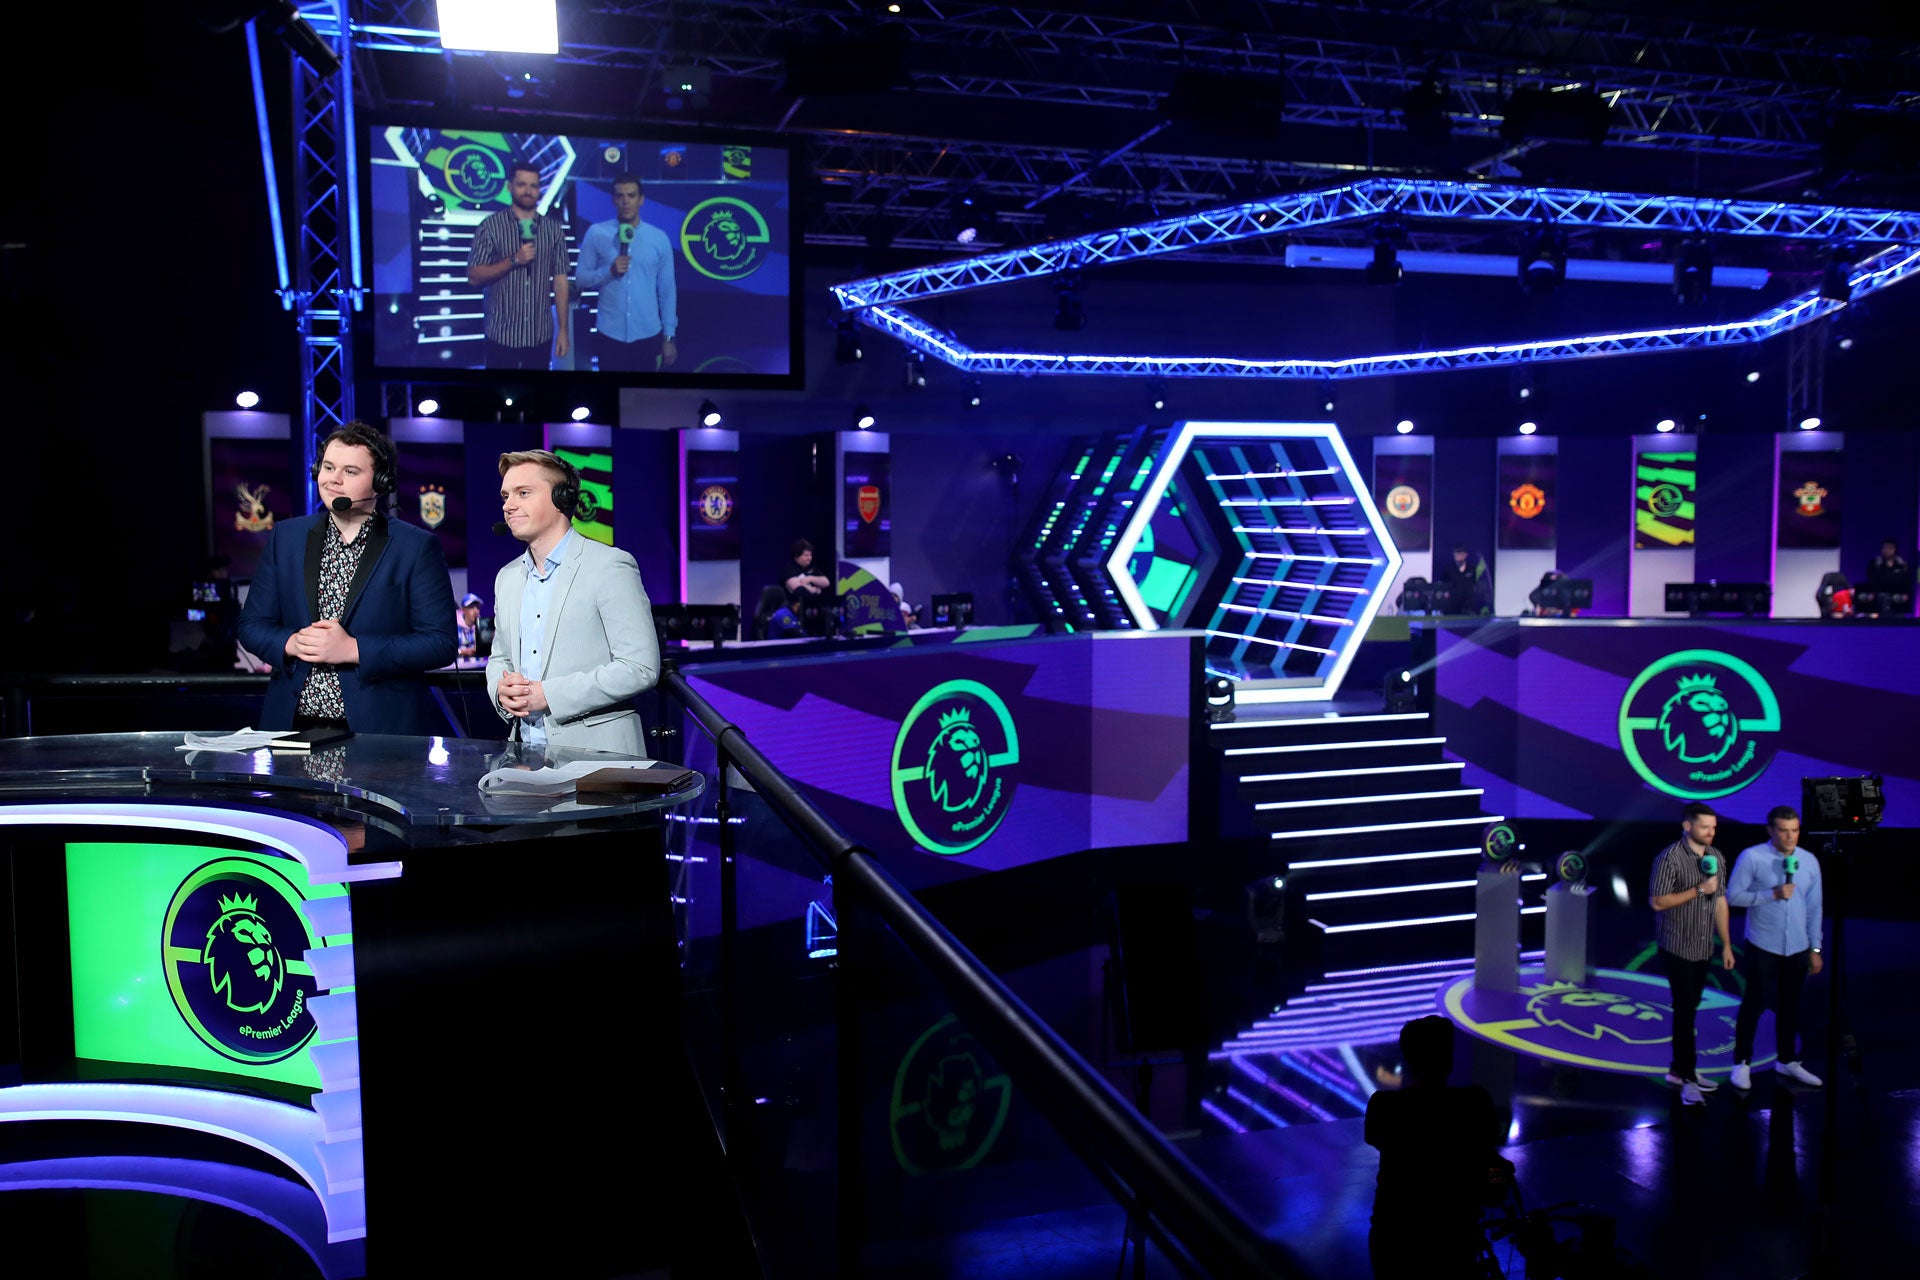 EA kicks off first FIFA e-PL final, but is there a major issue with online video gaming?